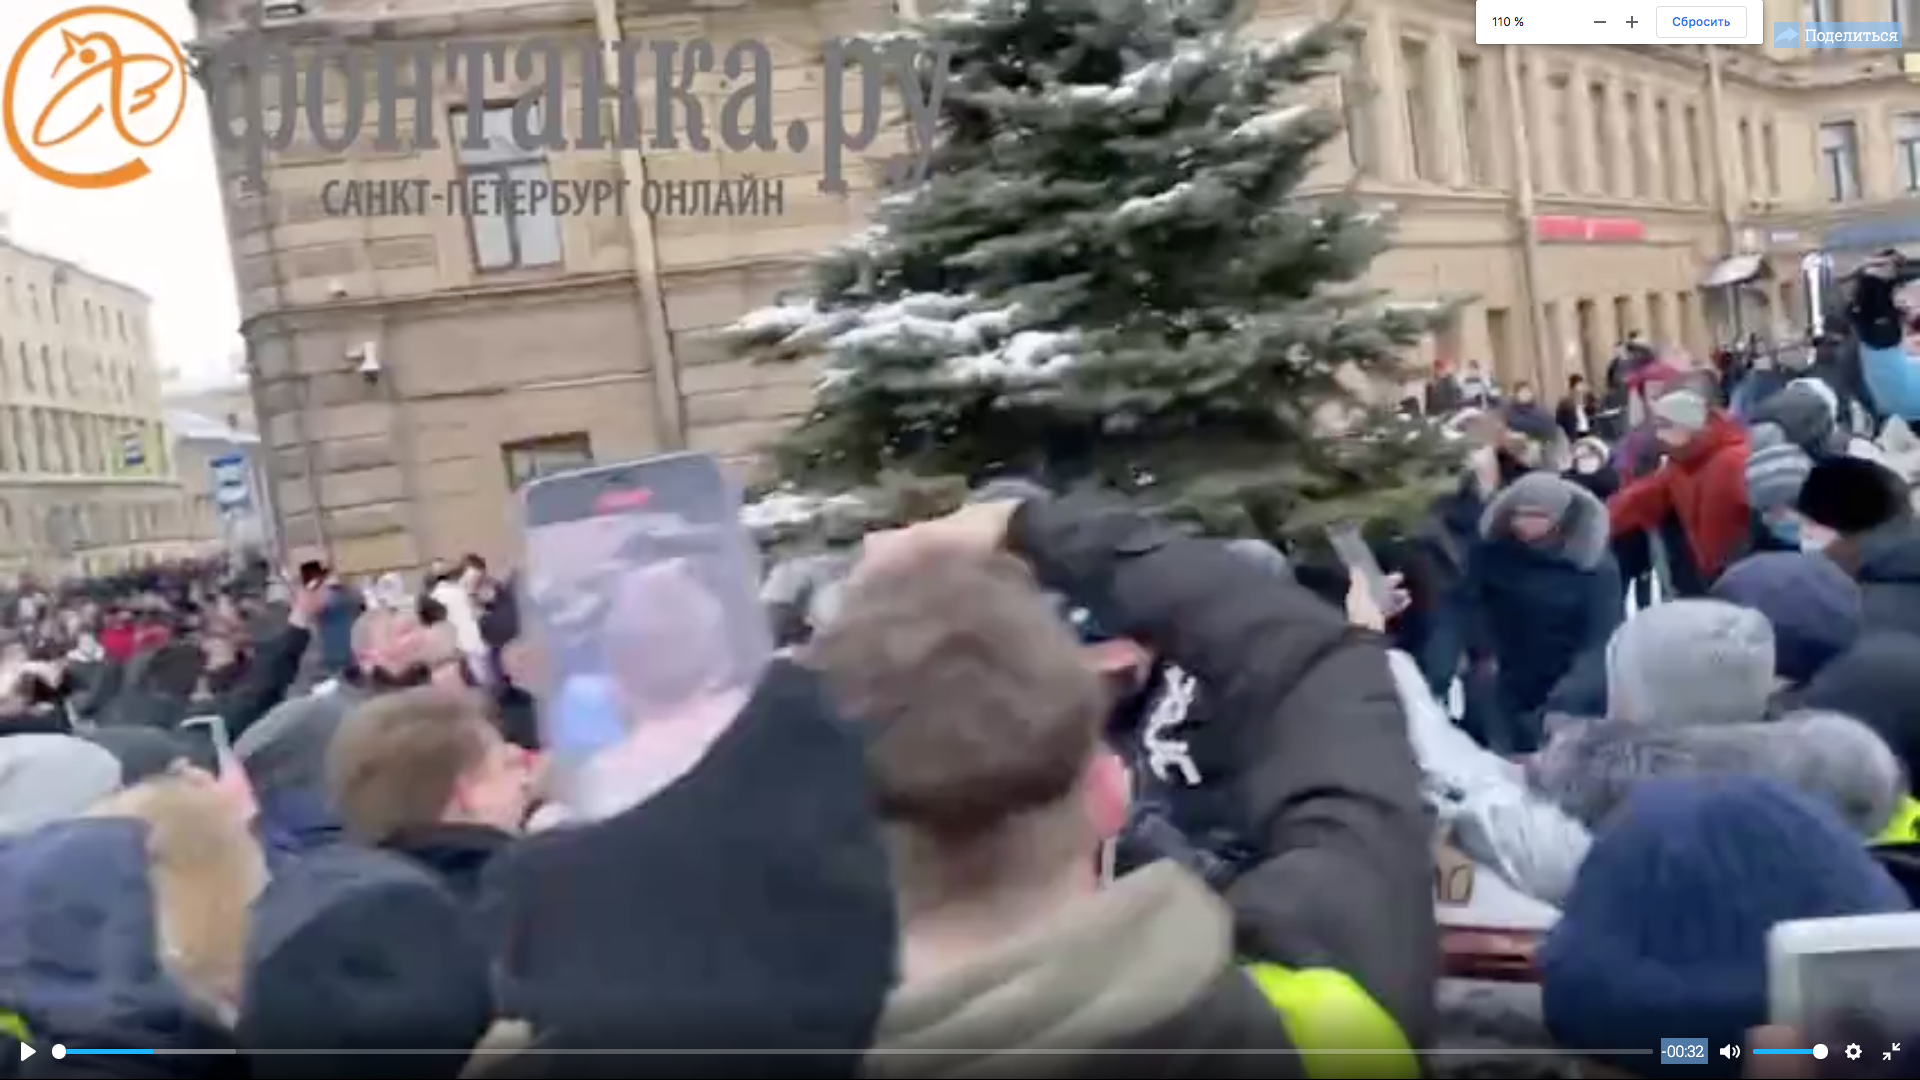 "Fontanka": on Sennaya Square in St. Petersburg, the police used gas against protesters